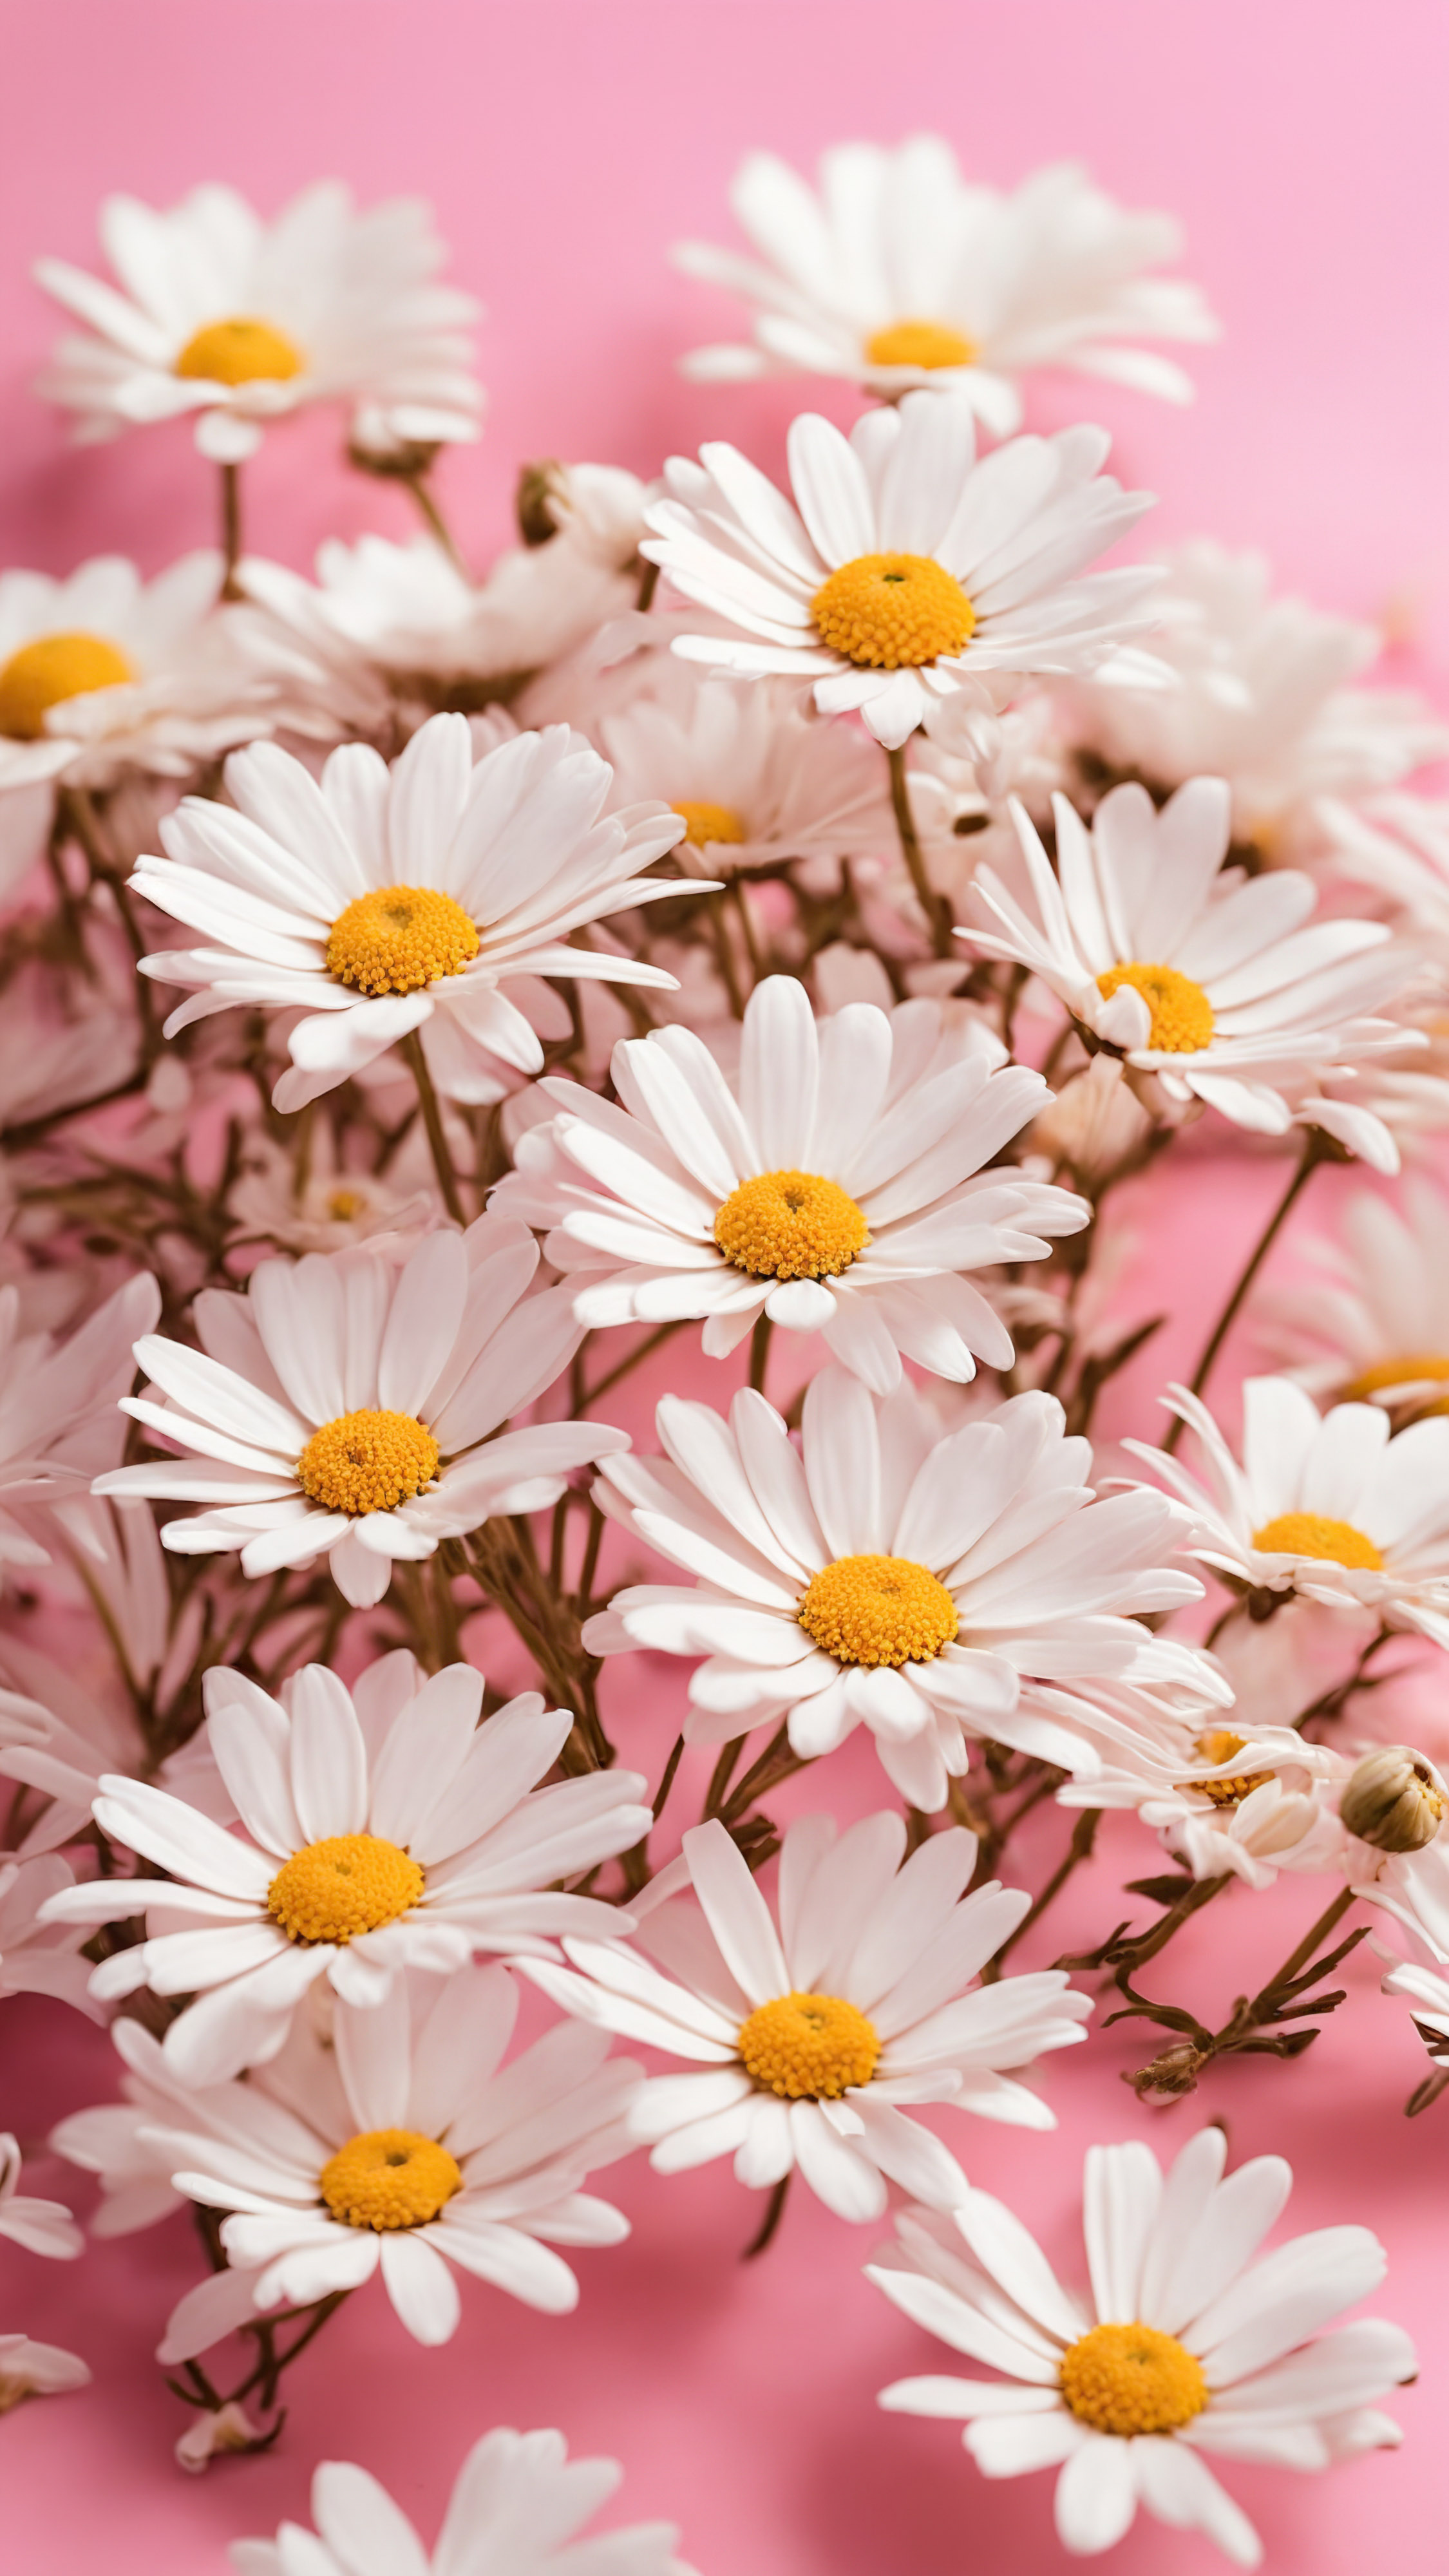 Admire the elegance of white daisies with yellow centers scattered across a pink background, with our flower-themed cute wallpaper for your iPhone.